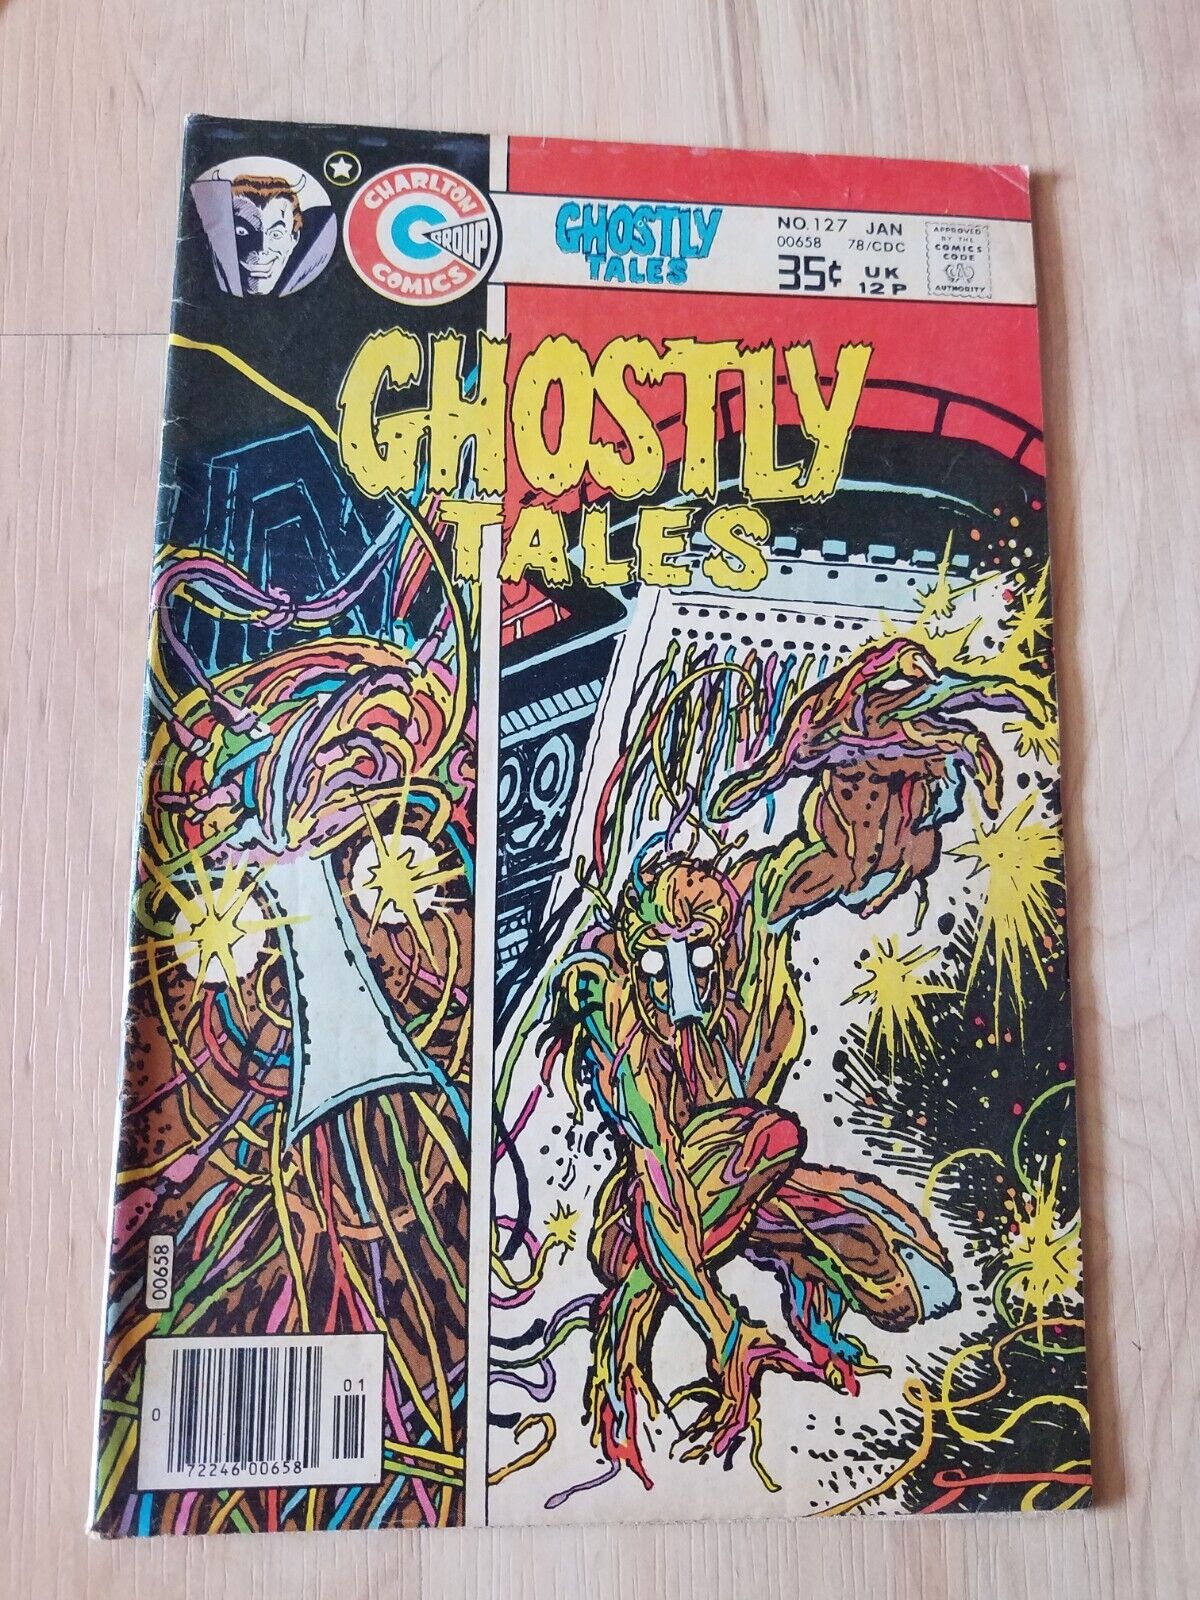 #127 Jan 1978 Ghostly Tales Charlton Comics Group Bronze Age Horror 